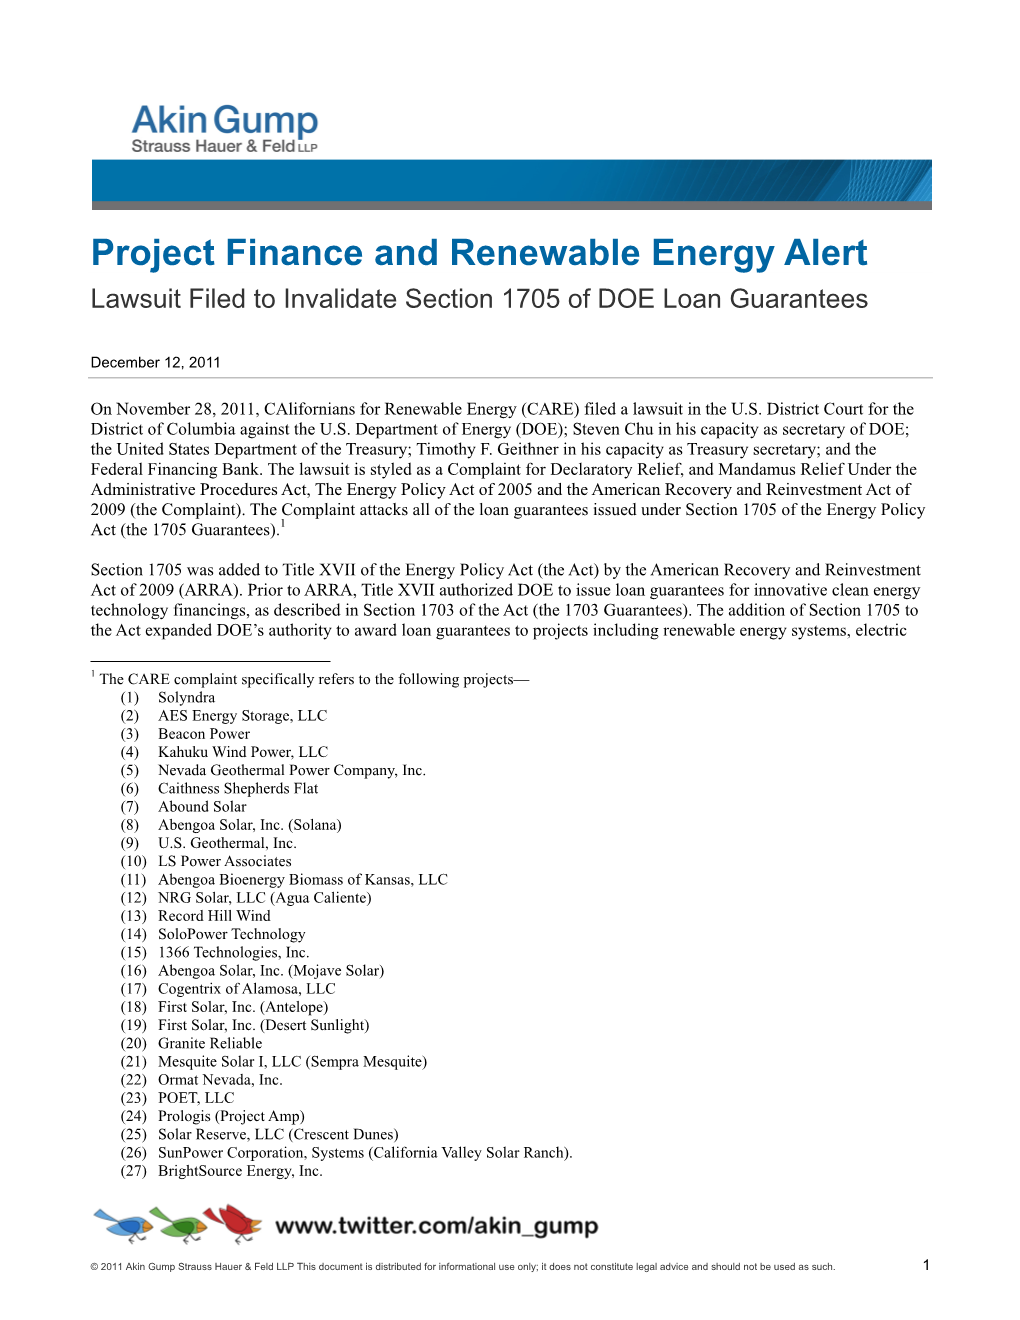 Project Finance and Renewable Energy Alert Lawsuit Filed to Invalidate Section 1705 of DOE Loan Guarantees